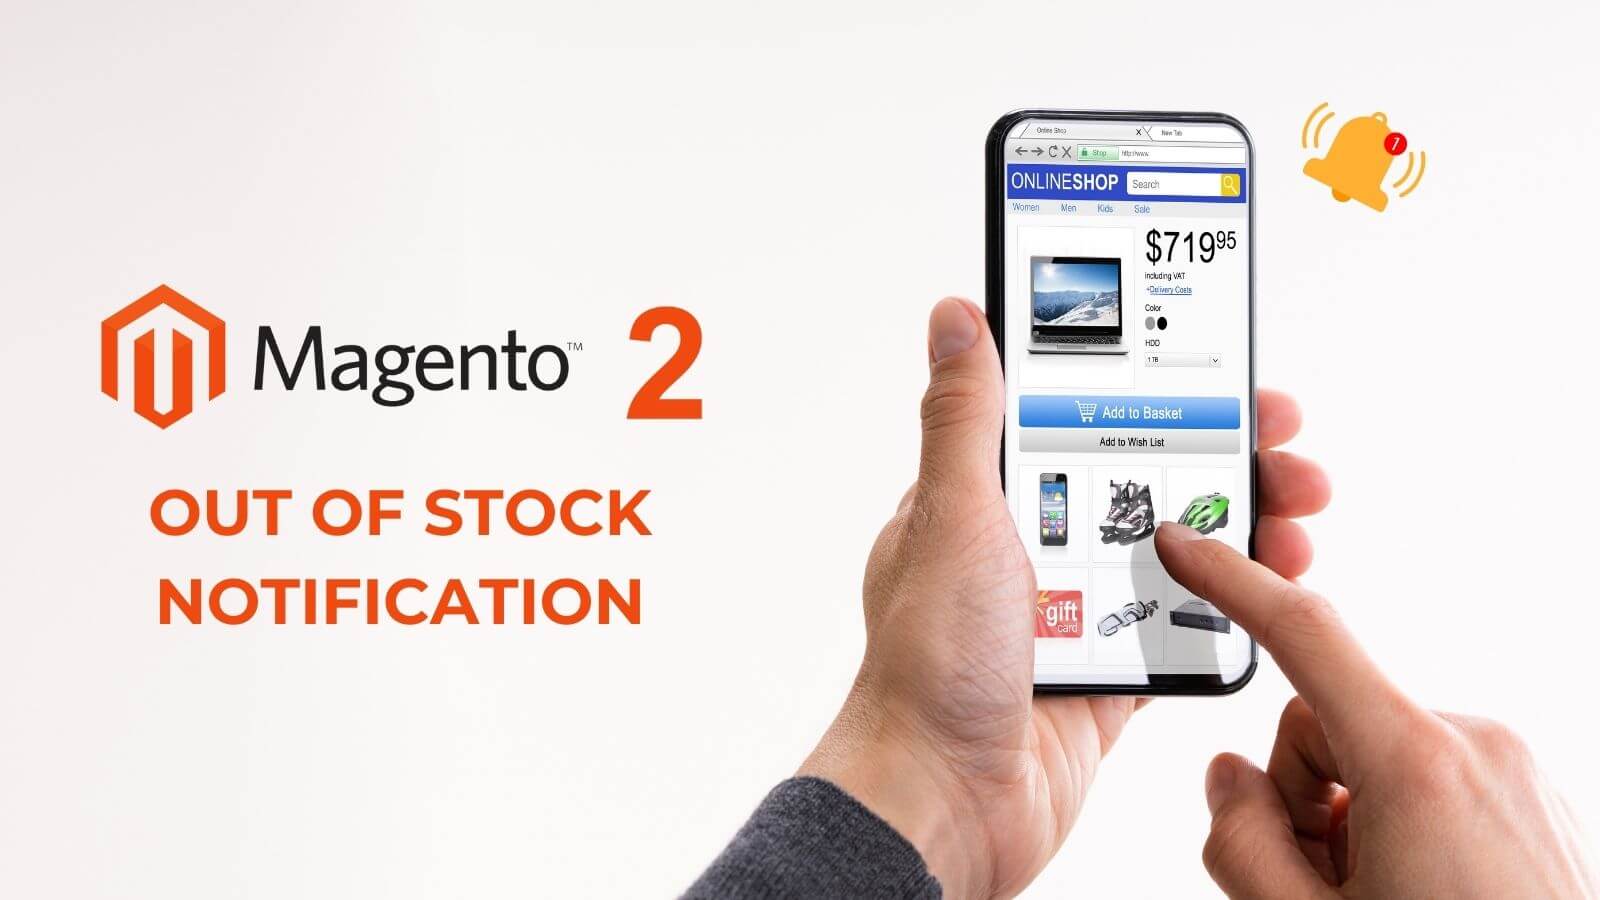 How To Set Up Magento 2 Out of Stock Notification